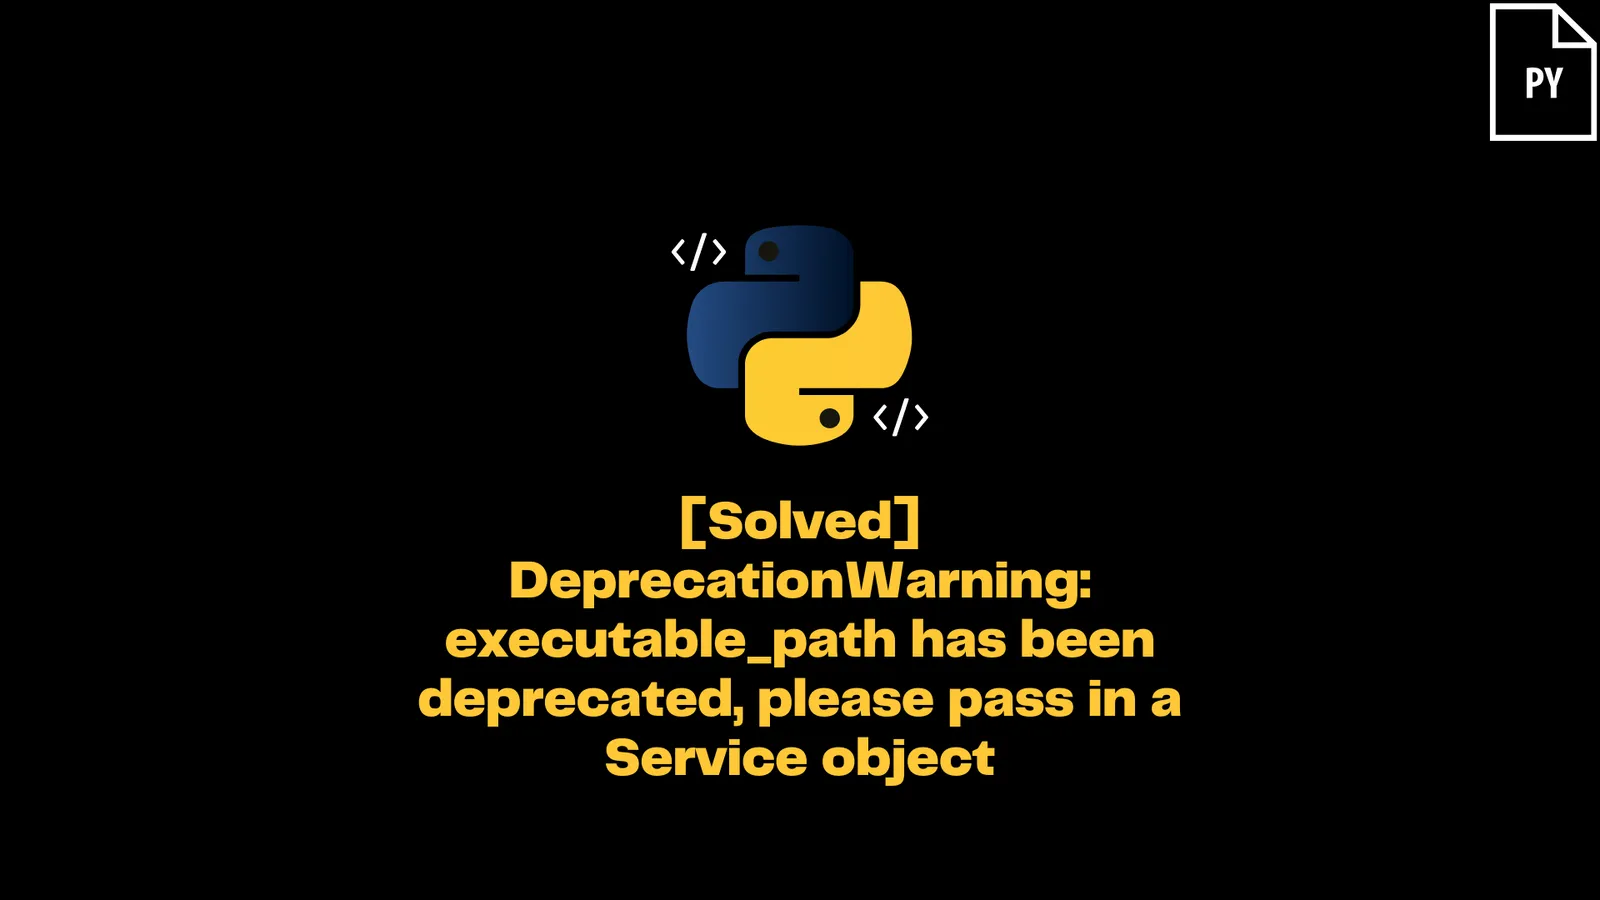 [Solved] DeprecationWarning: executable_path has been deprecated, please pass in a Service object - ItsMyCode